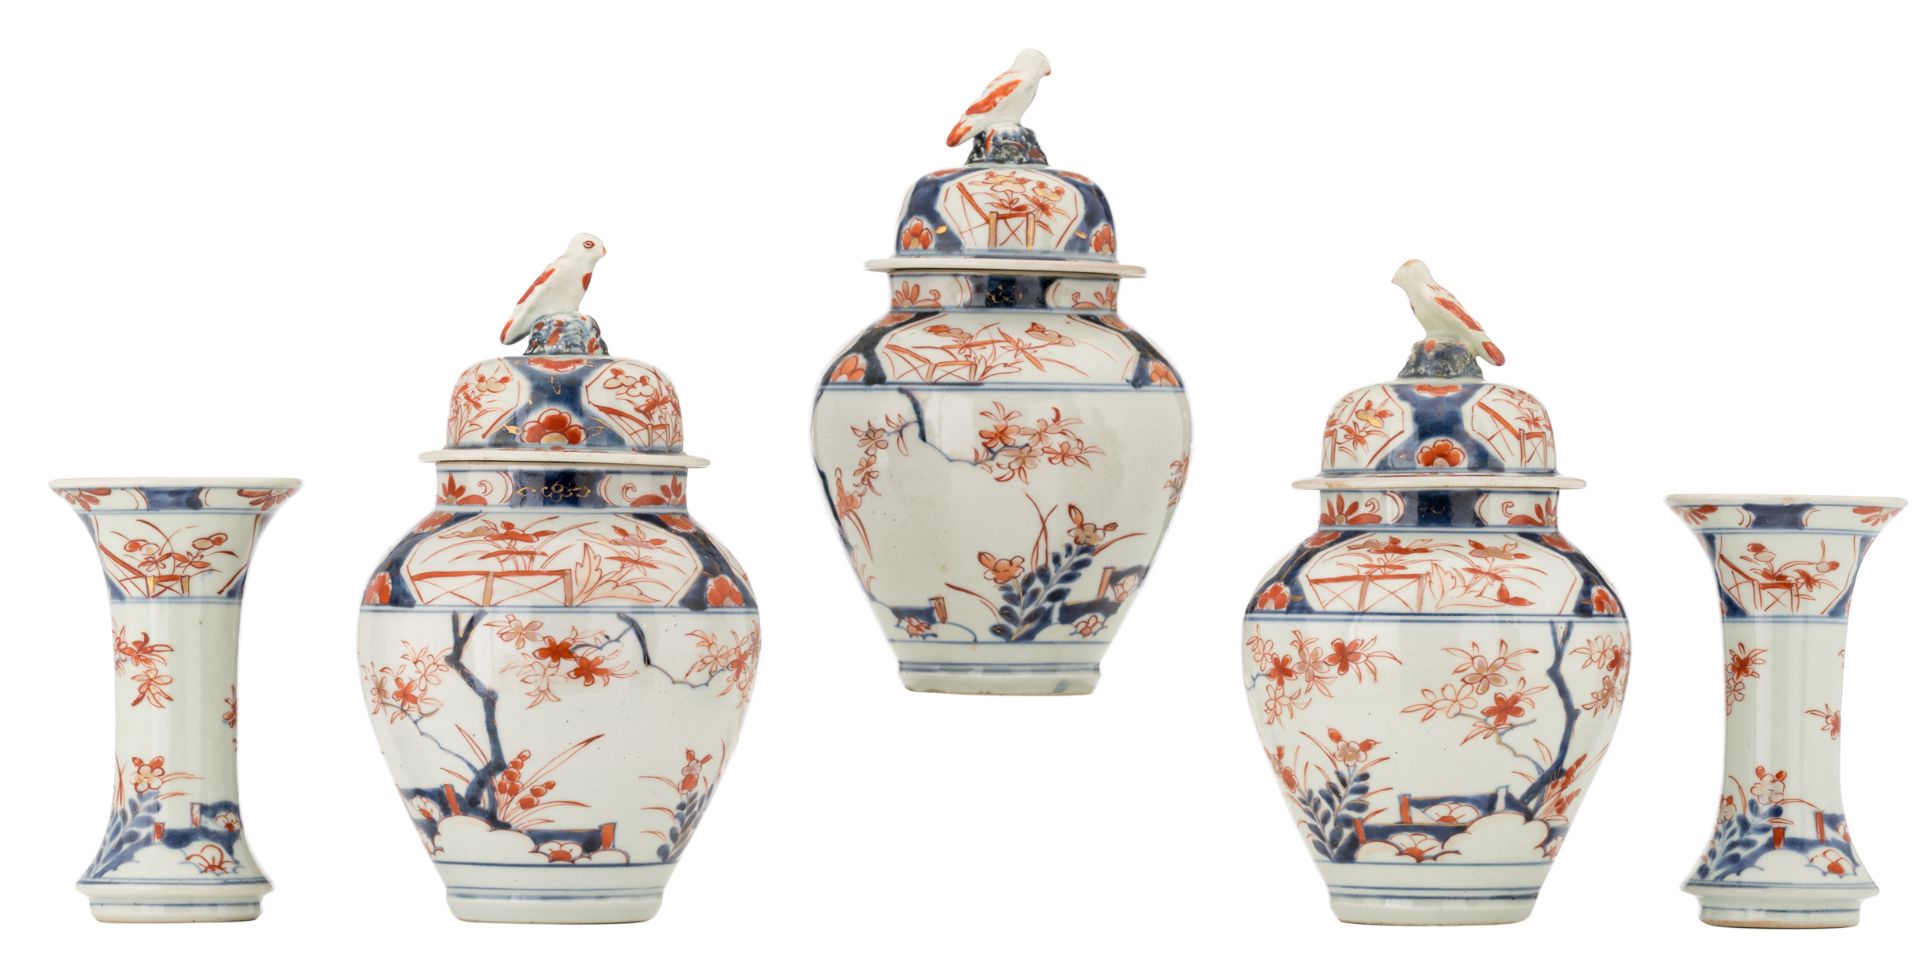 A Japanese Arita Imari five piece cabinet set, decorated with flower branches, 18thC, H 16 - 25 cm